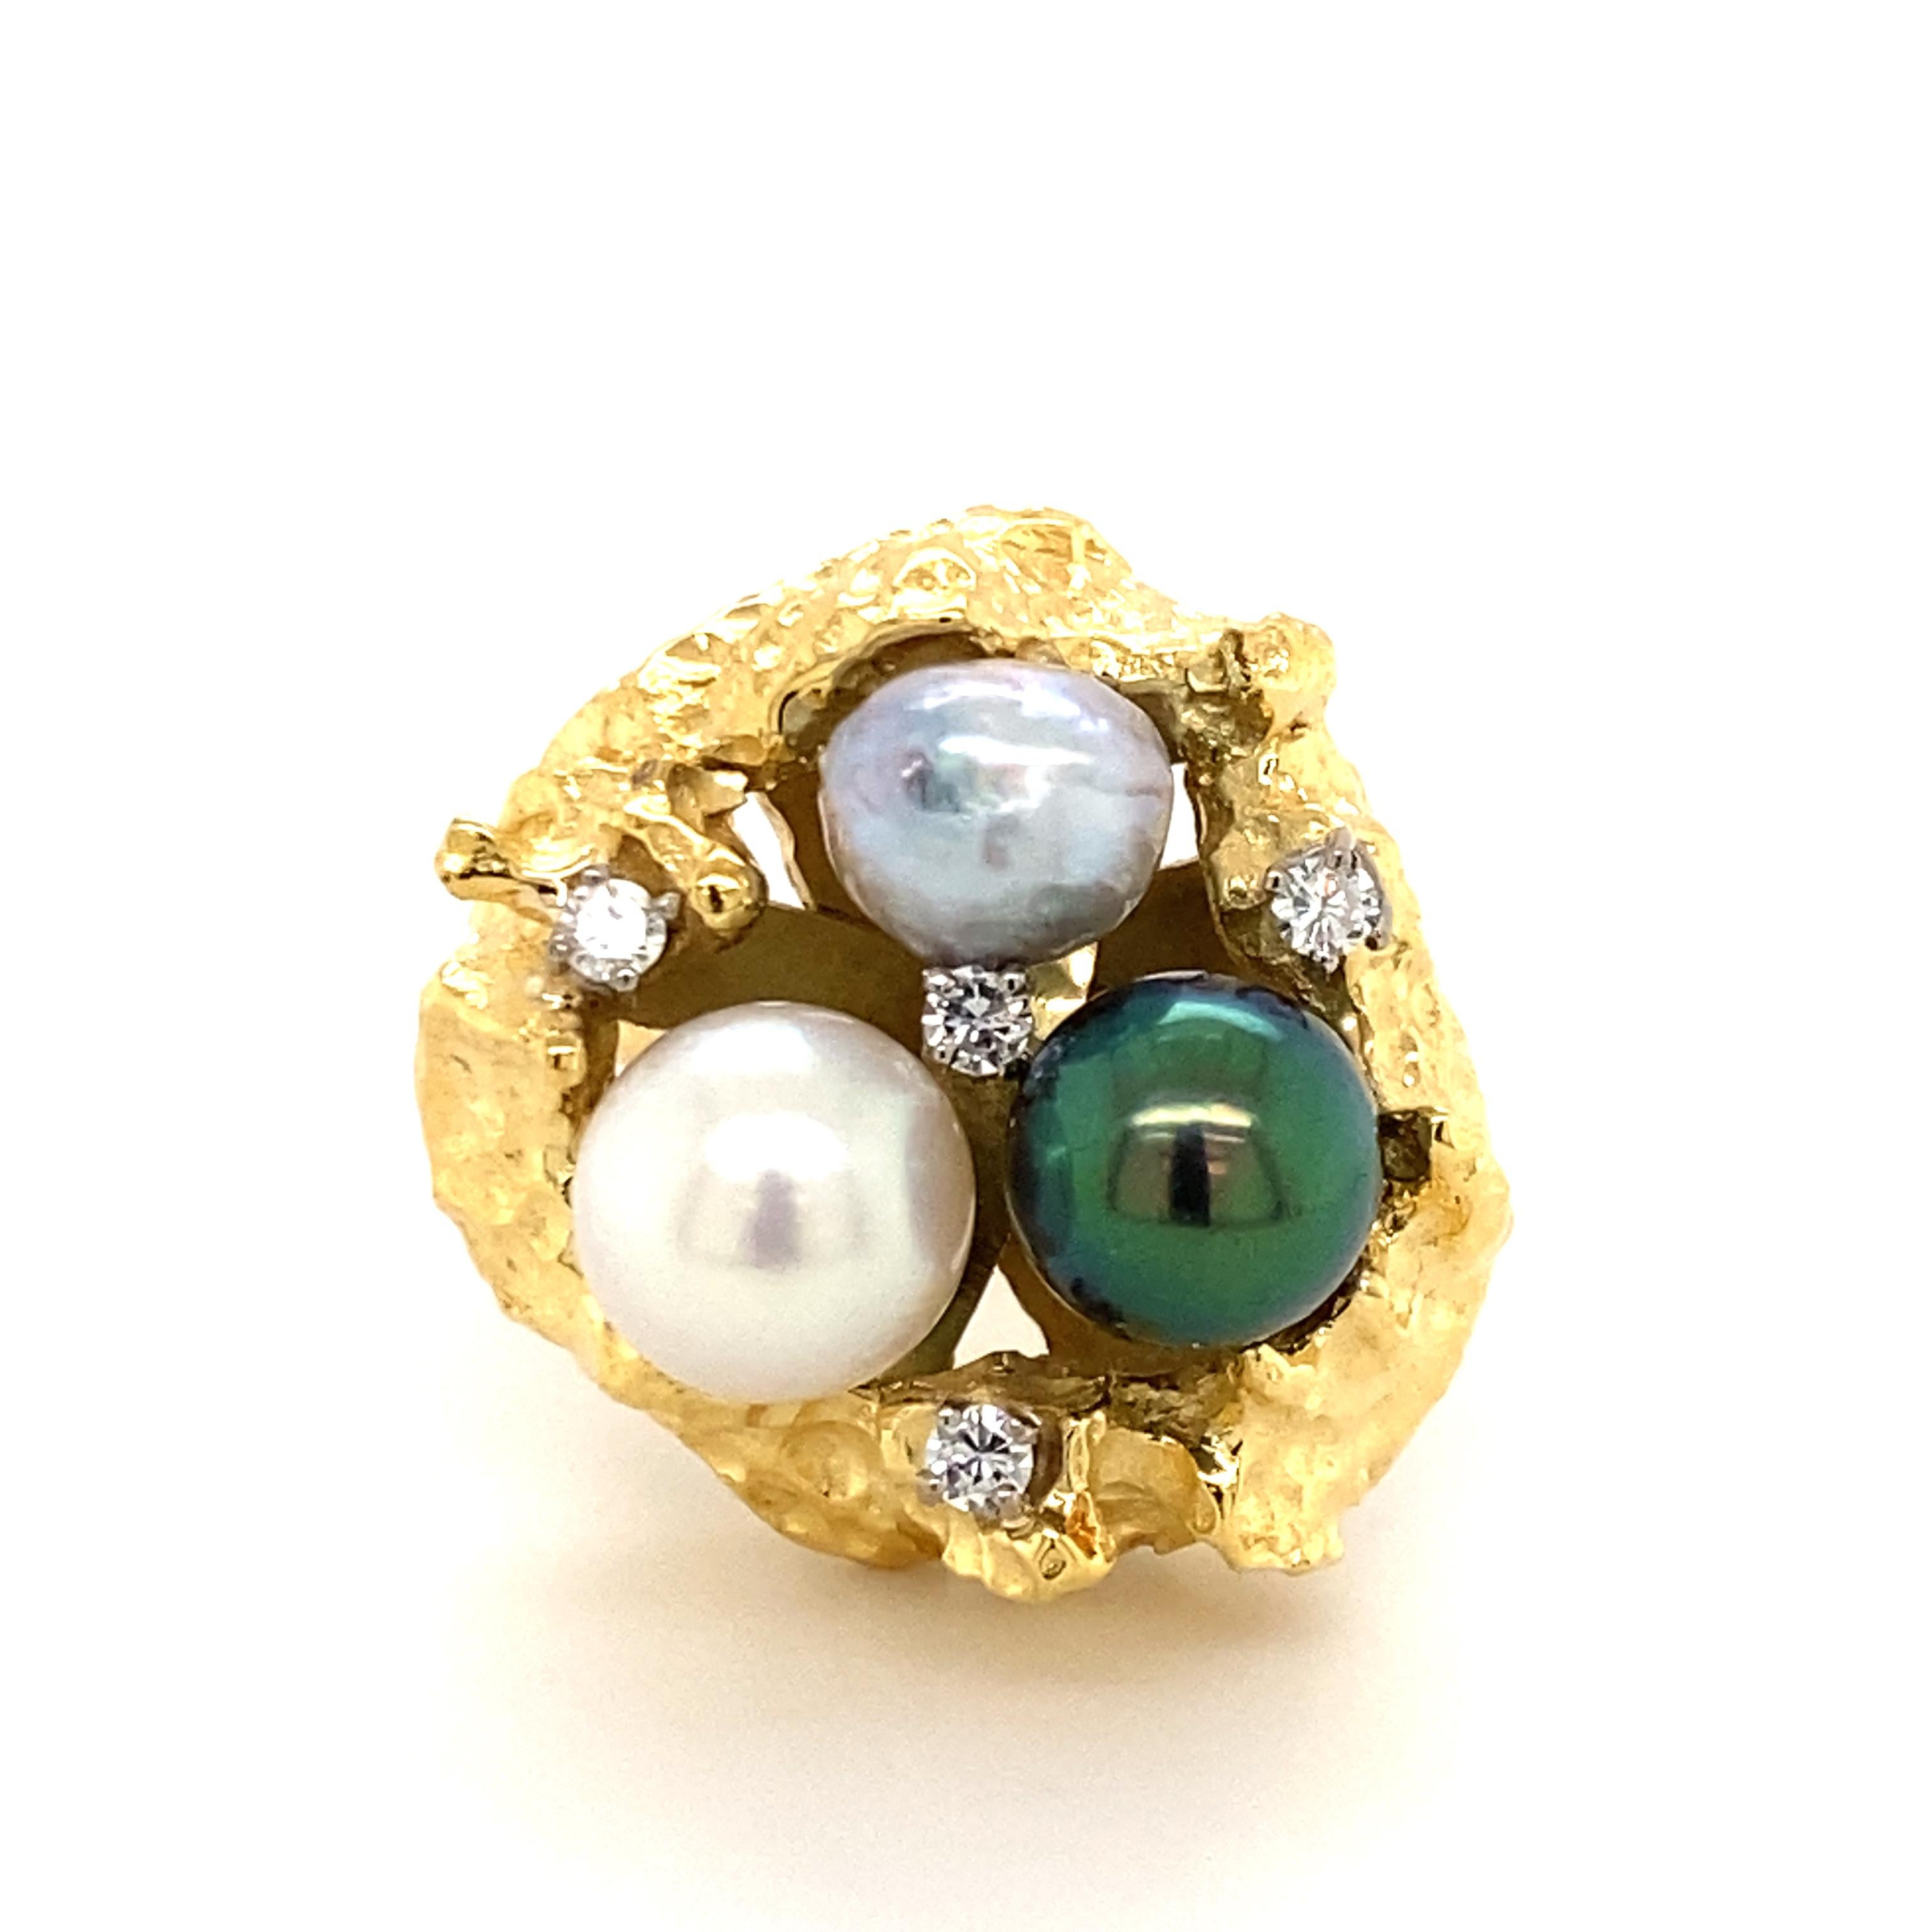 This stunningly chic ring in 14 karat yellow gold is set with three cultured pearls and four brilliant-cut diamonds. The vividly shimmering cultured pearls (white, green-grey and light grey, approx. 8.5 to 9.5 mm) are draped in a golden nest and